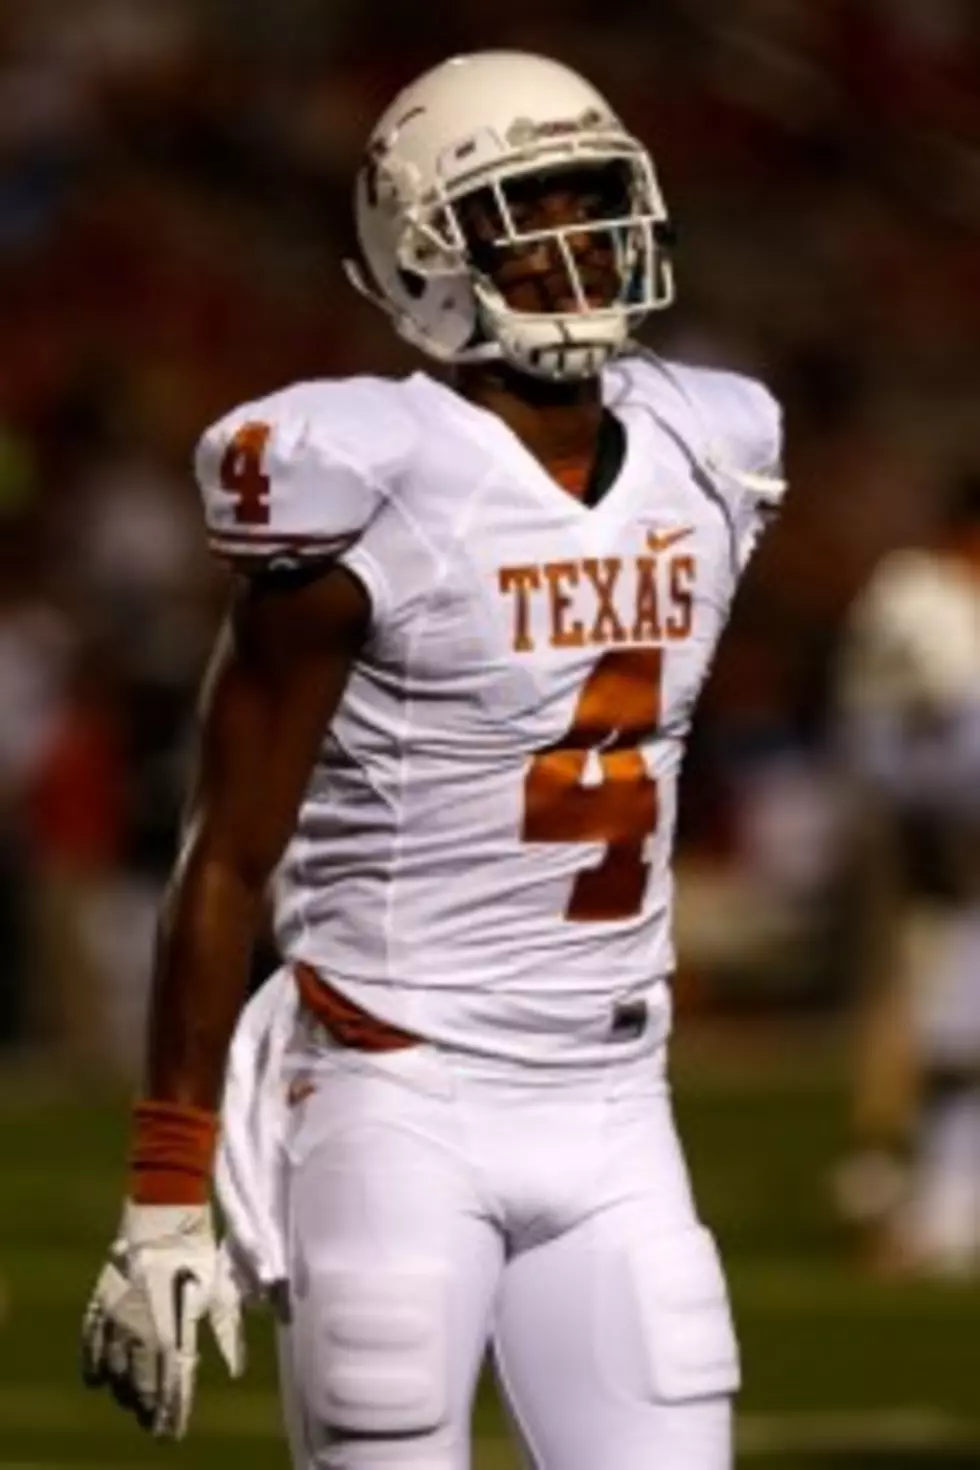 University of Texas Receiver Cayleb Jones Charged With Assault, Leaving Longhorns